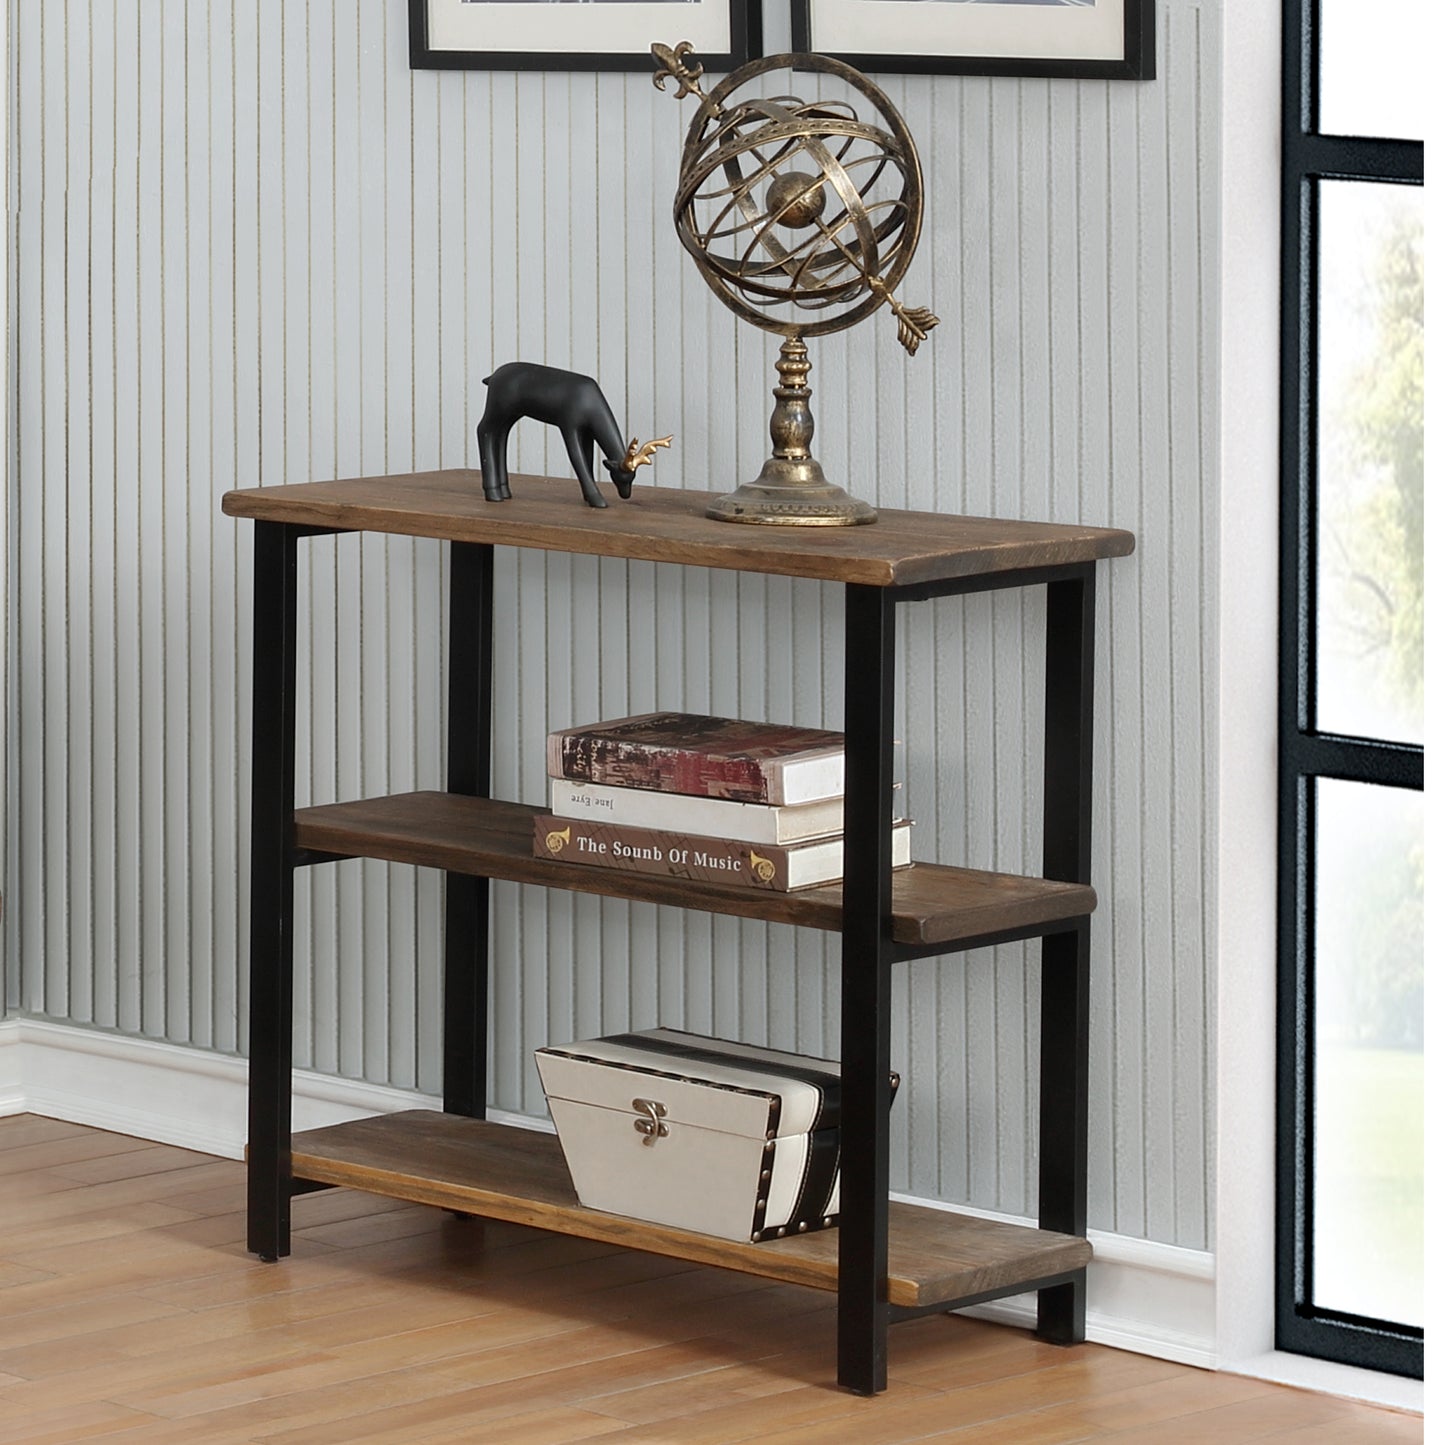 Pomona 31"H 2-Shelf Metal and Solid Wood Under-Window Bookcase